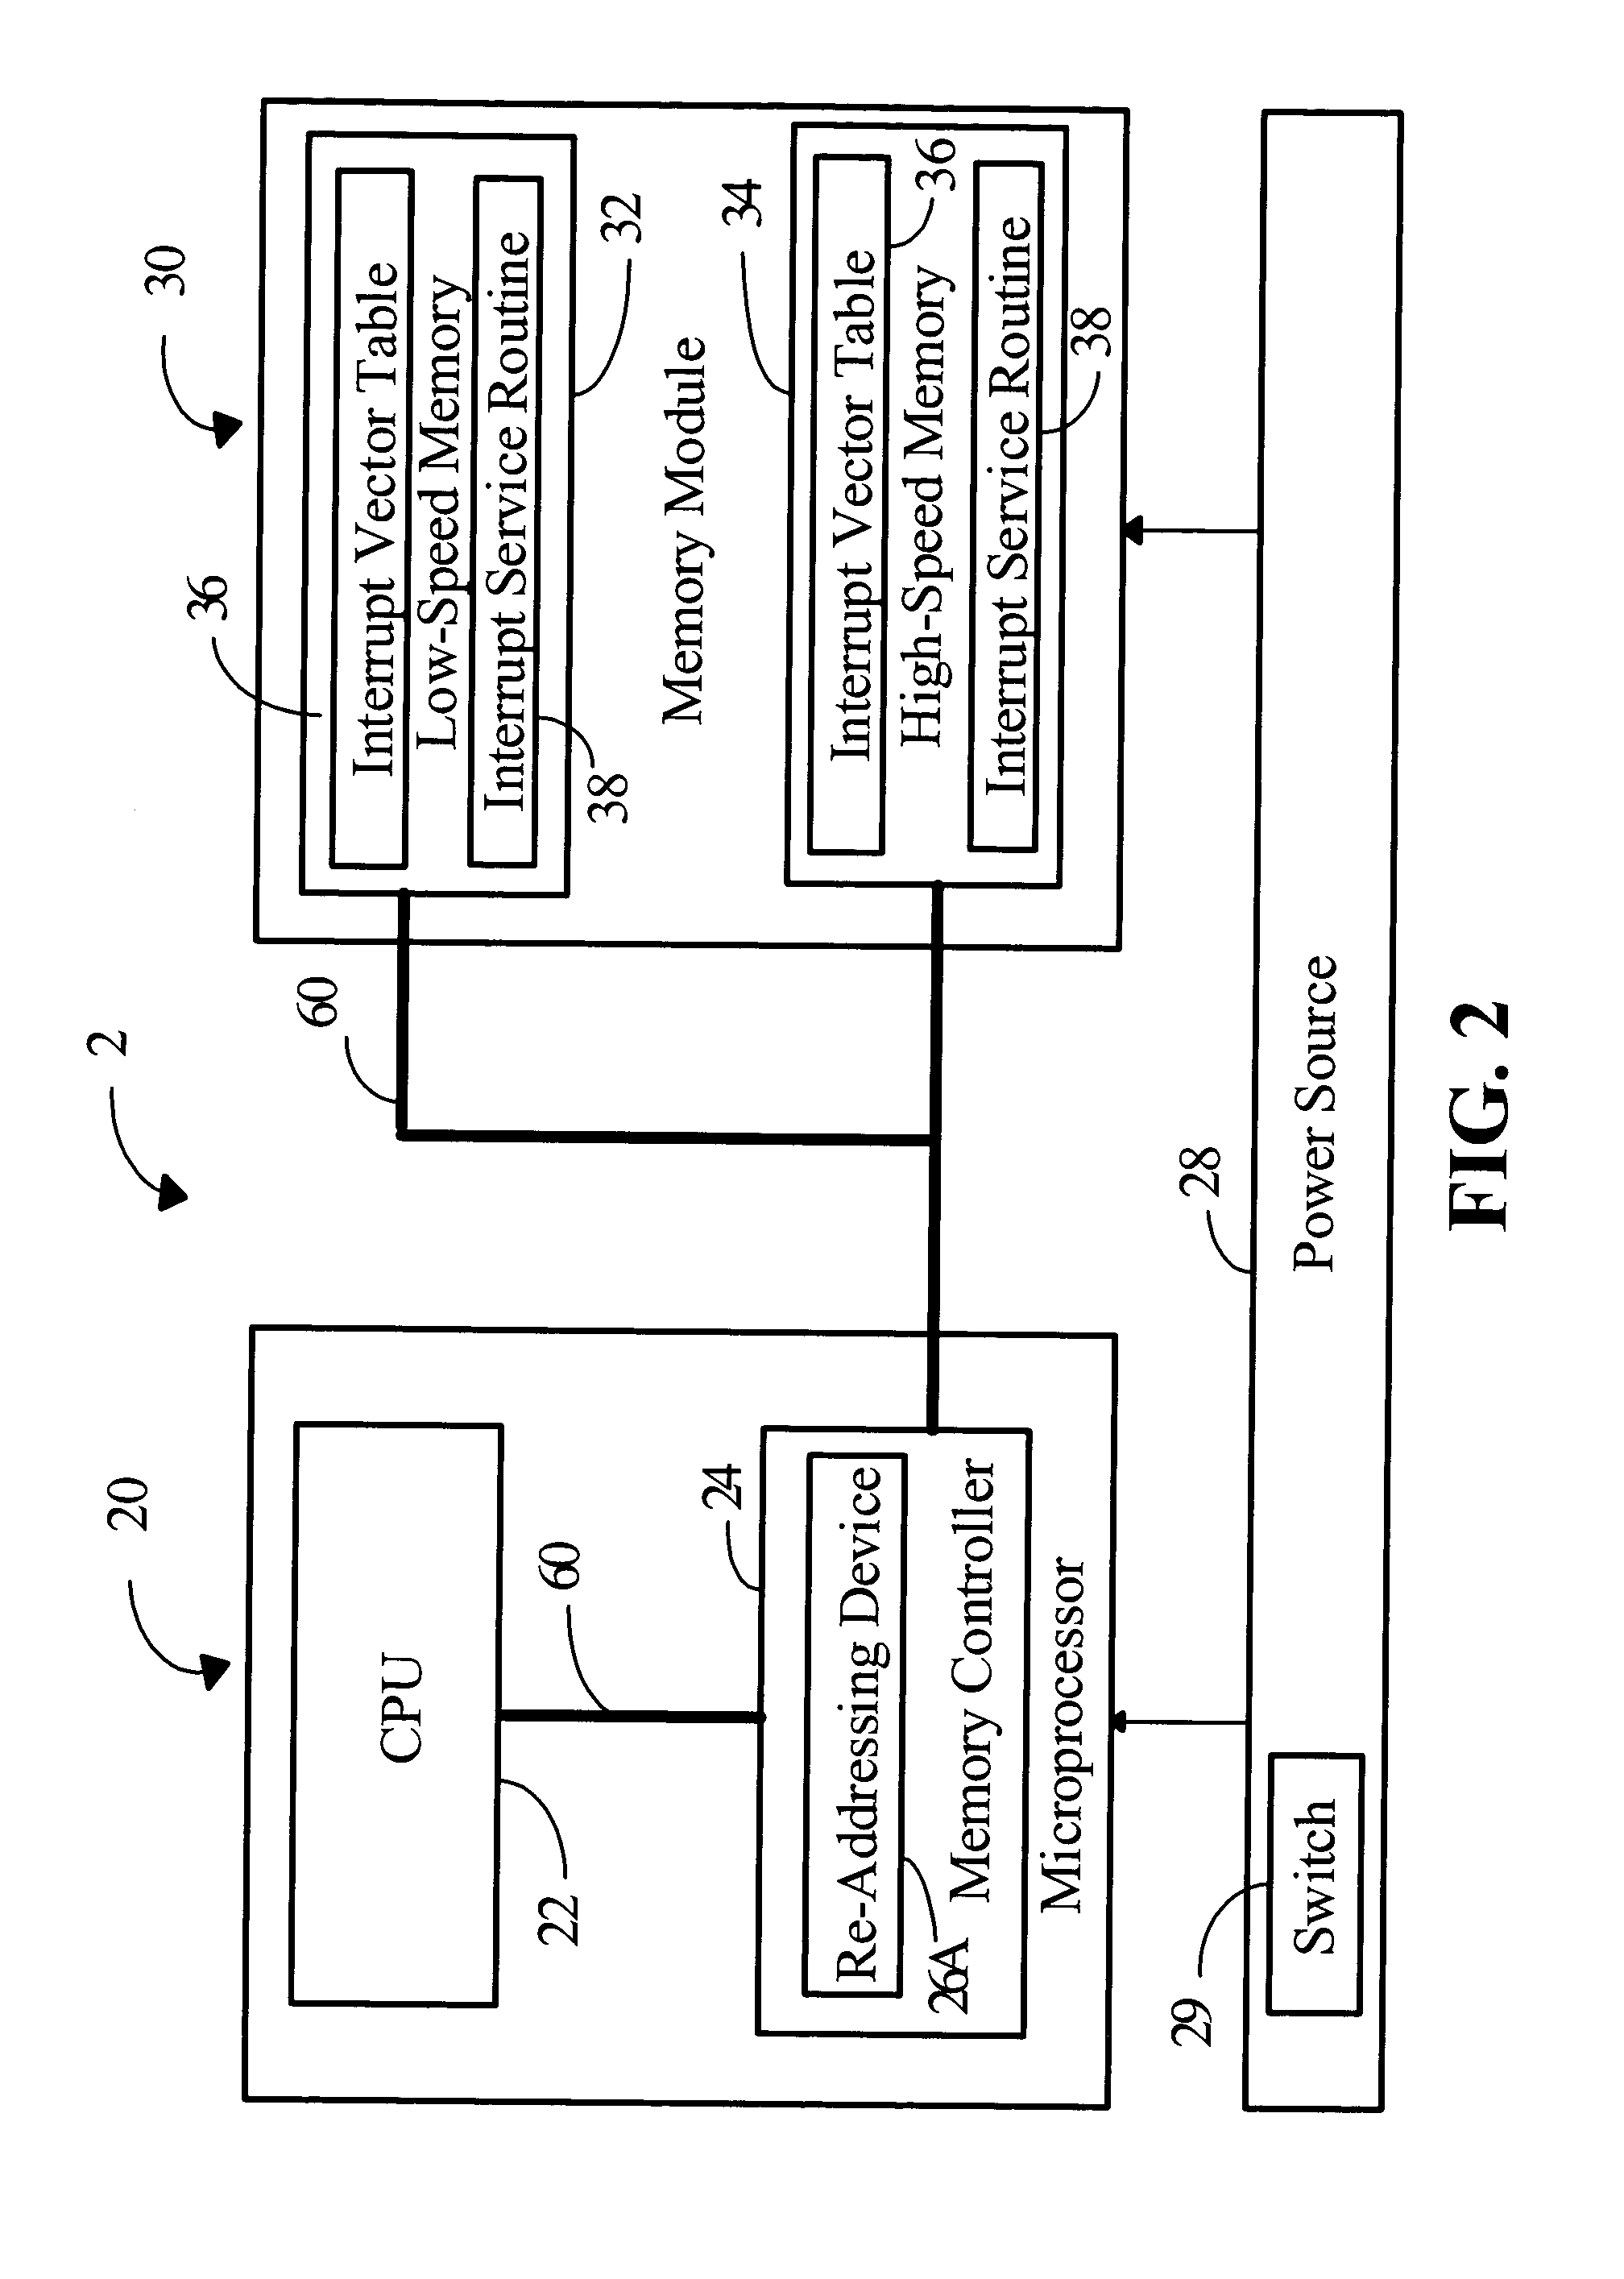 Interrupt-processing system for shortening interrupt latency in microprocessor